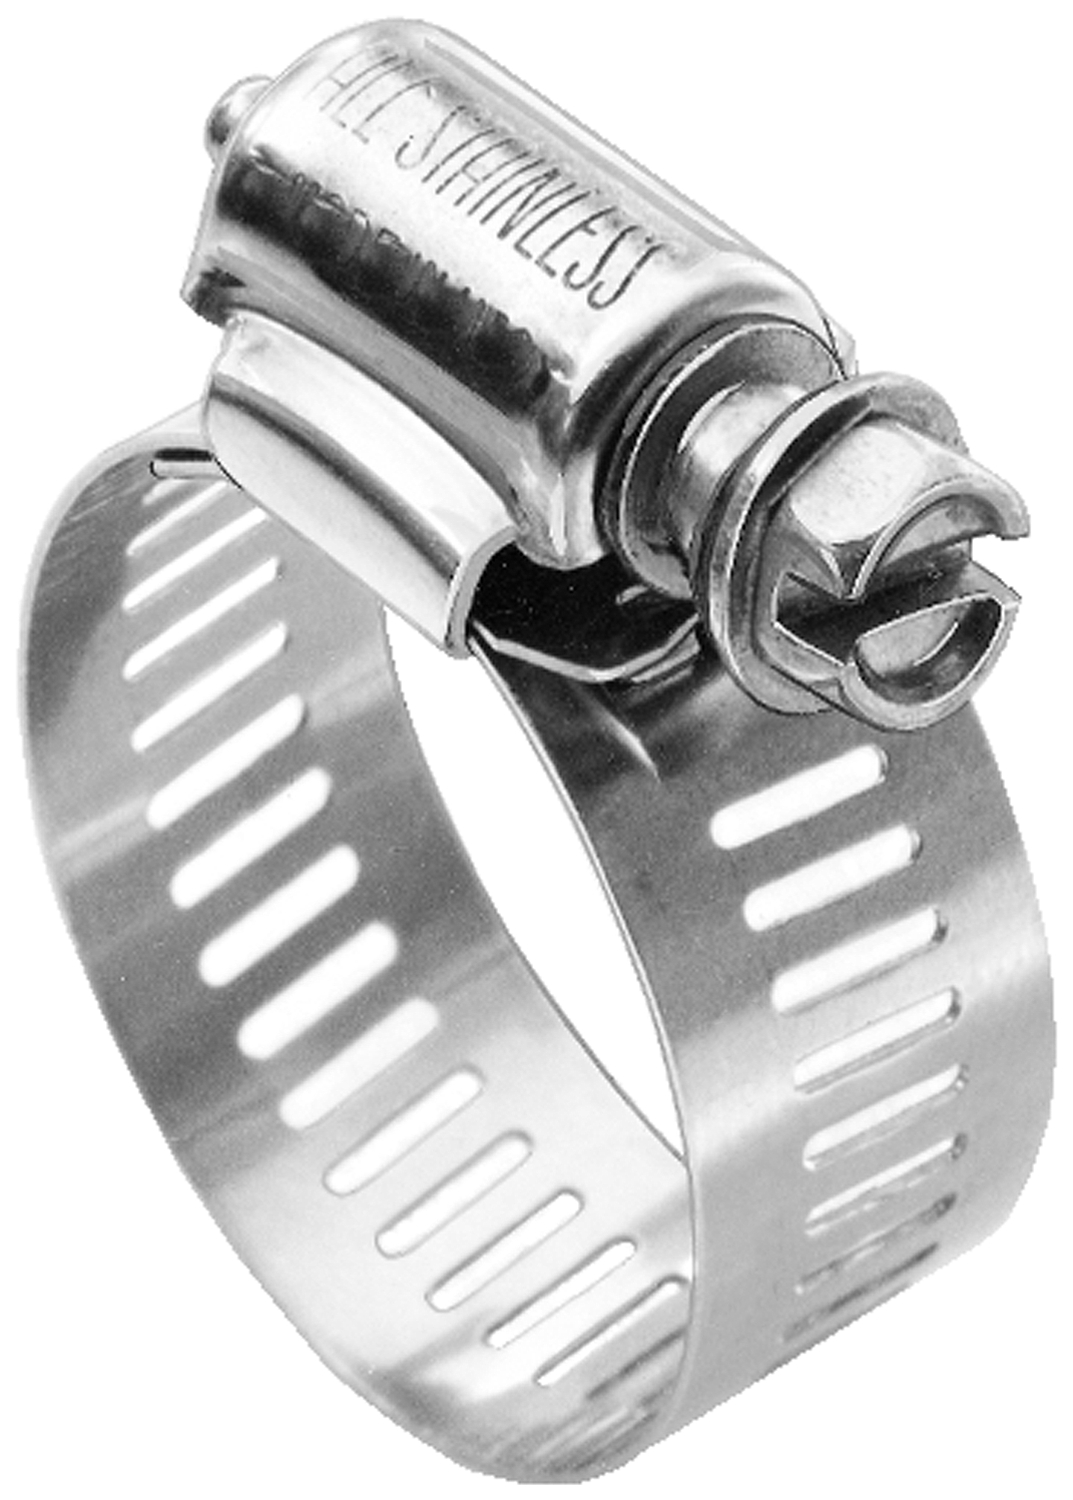 Hose Clamps and Couplings